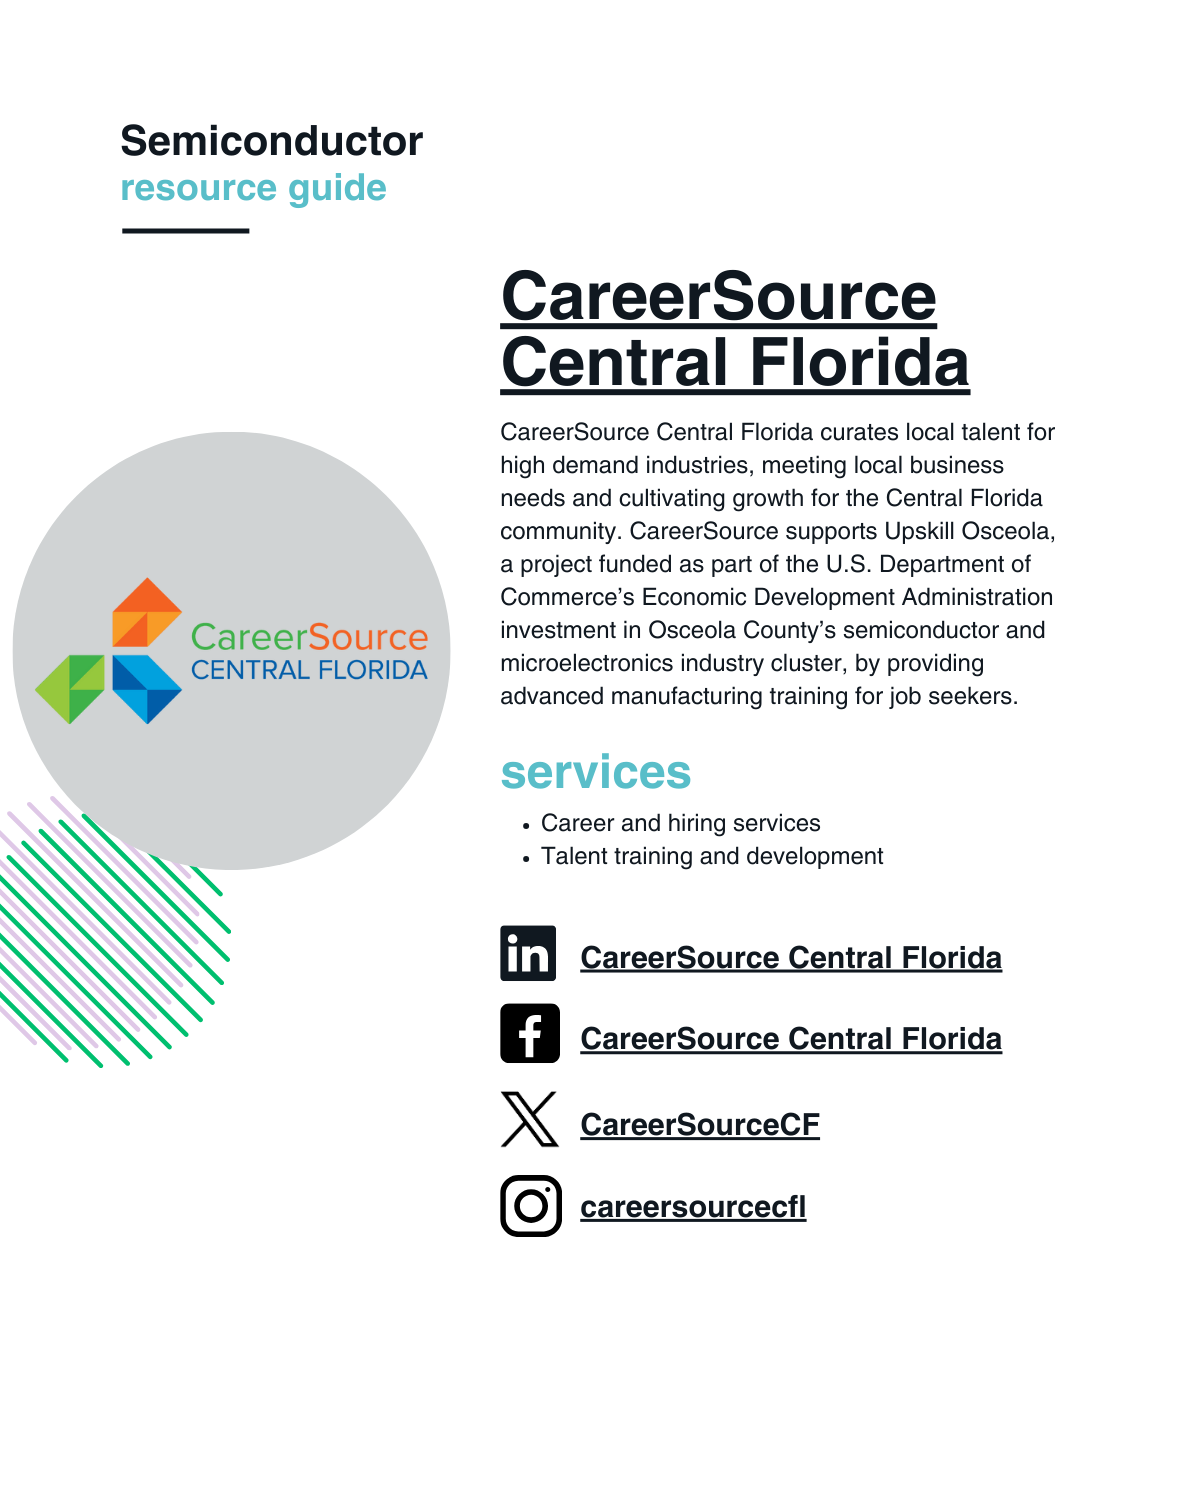 CareerSource Central Florida curates local talent for high demand industries, meeting local business needs and cultivating growth for the Central Florida community. CareerSource supports Upskill Osceola, a project funded as part of the U.S. Department of Commerce’s Economic Development Administration investment in Osceola County’s semiconductor and microelectronics industry cluster, by providing advanced manufacturing training for job seekers.